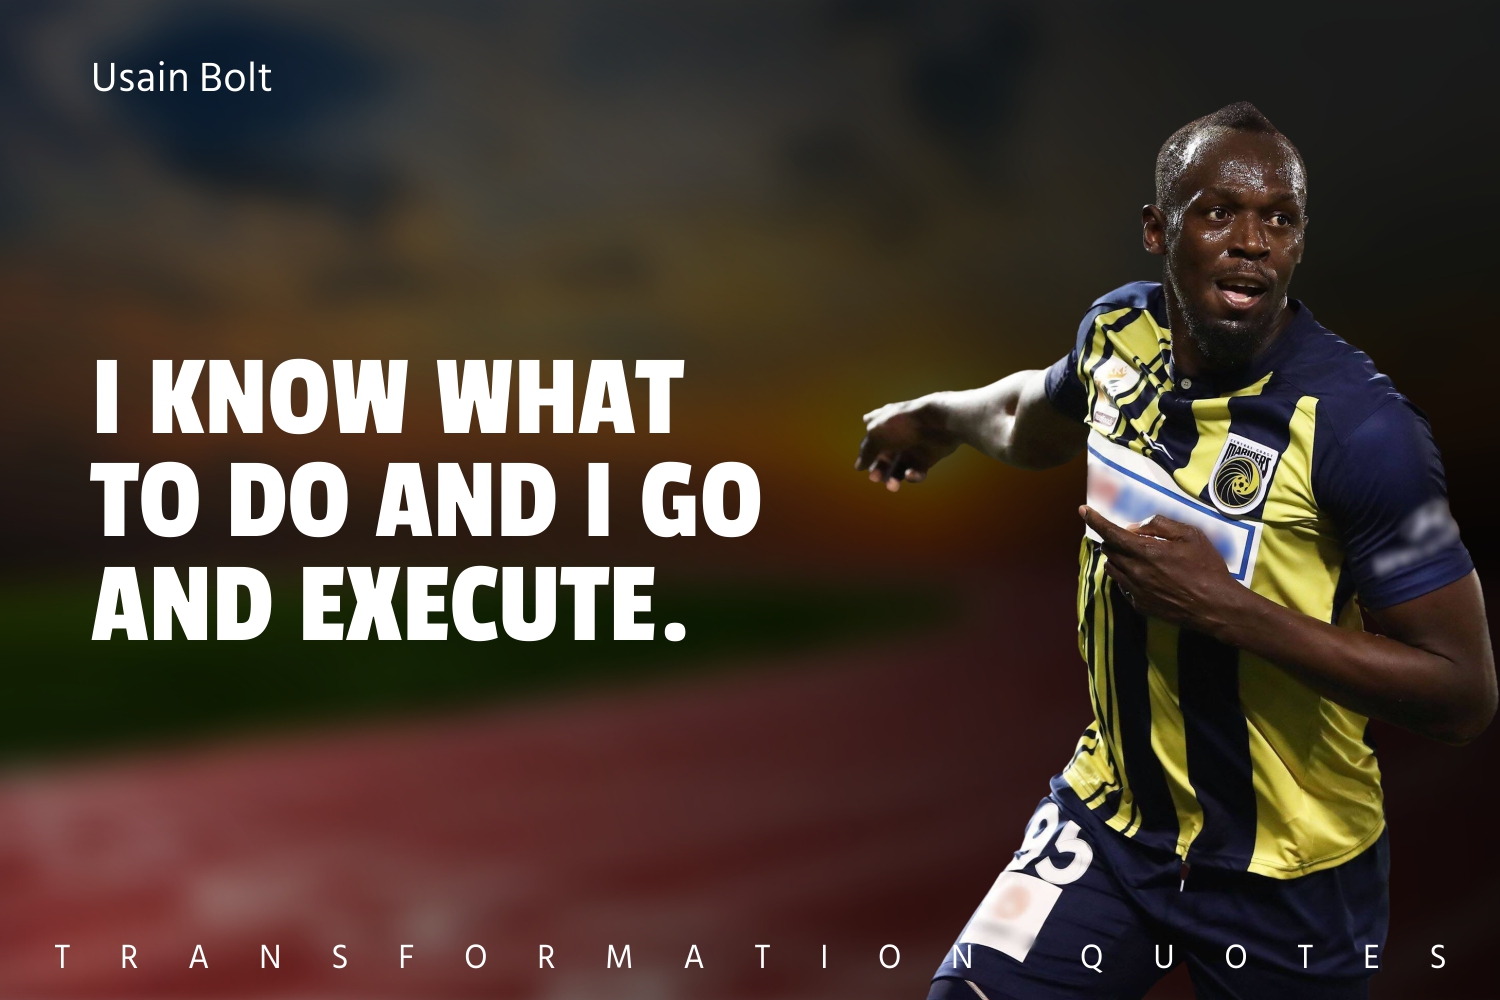 10 Usain Bolt Quotes That Will Inspire You | TransformationQuotes